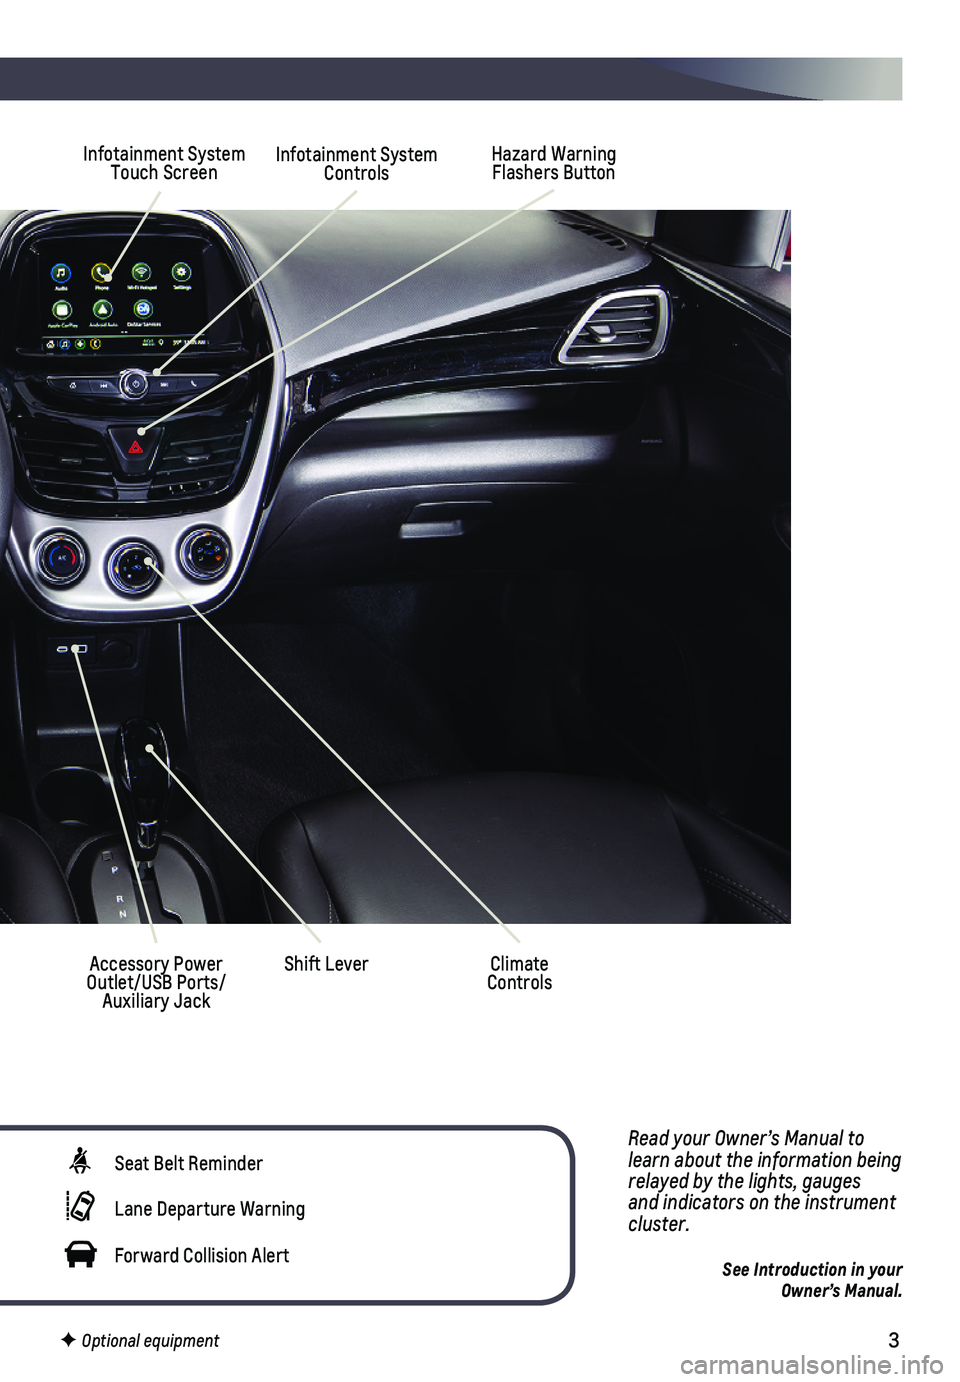 CHEVROLET SPARK 2021  Get To Know Guide 3
Read your Owner’s Manual to learn about the information being relayed by the lights, gauges and indicators on the instrument cluster.
See Introduction in your  Owner’s Manual.
Hazard Warning Fla